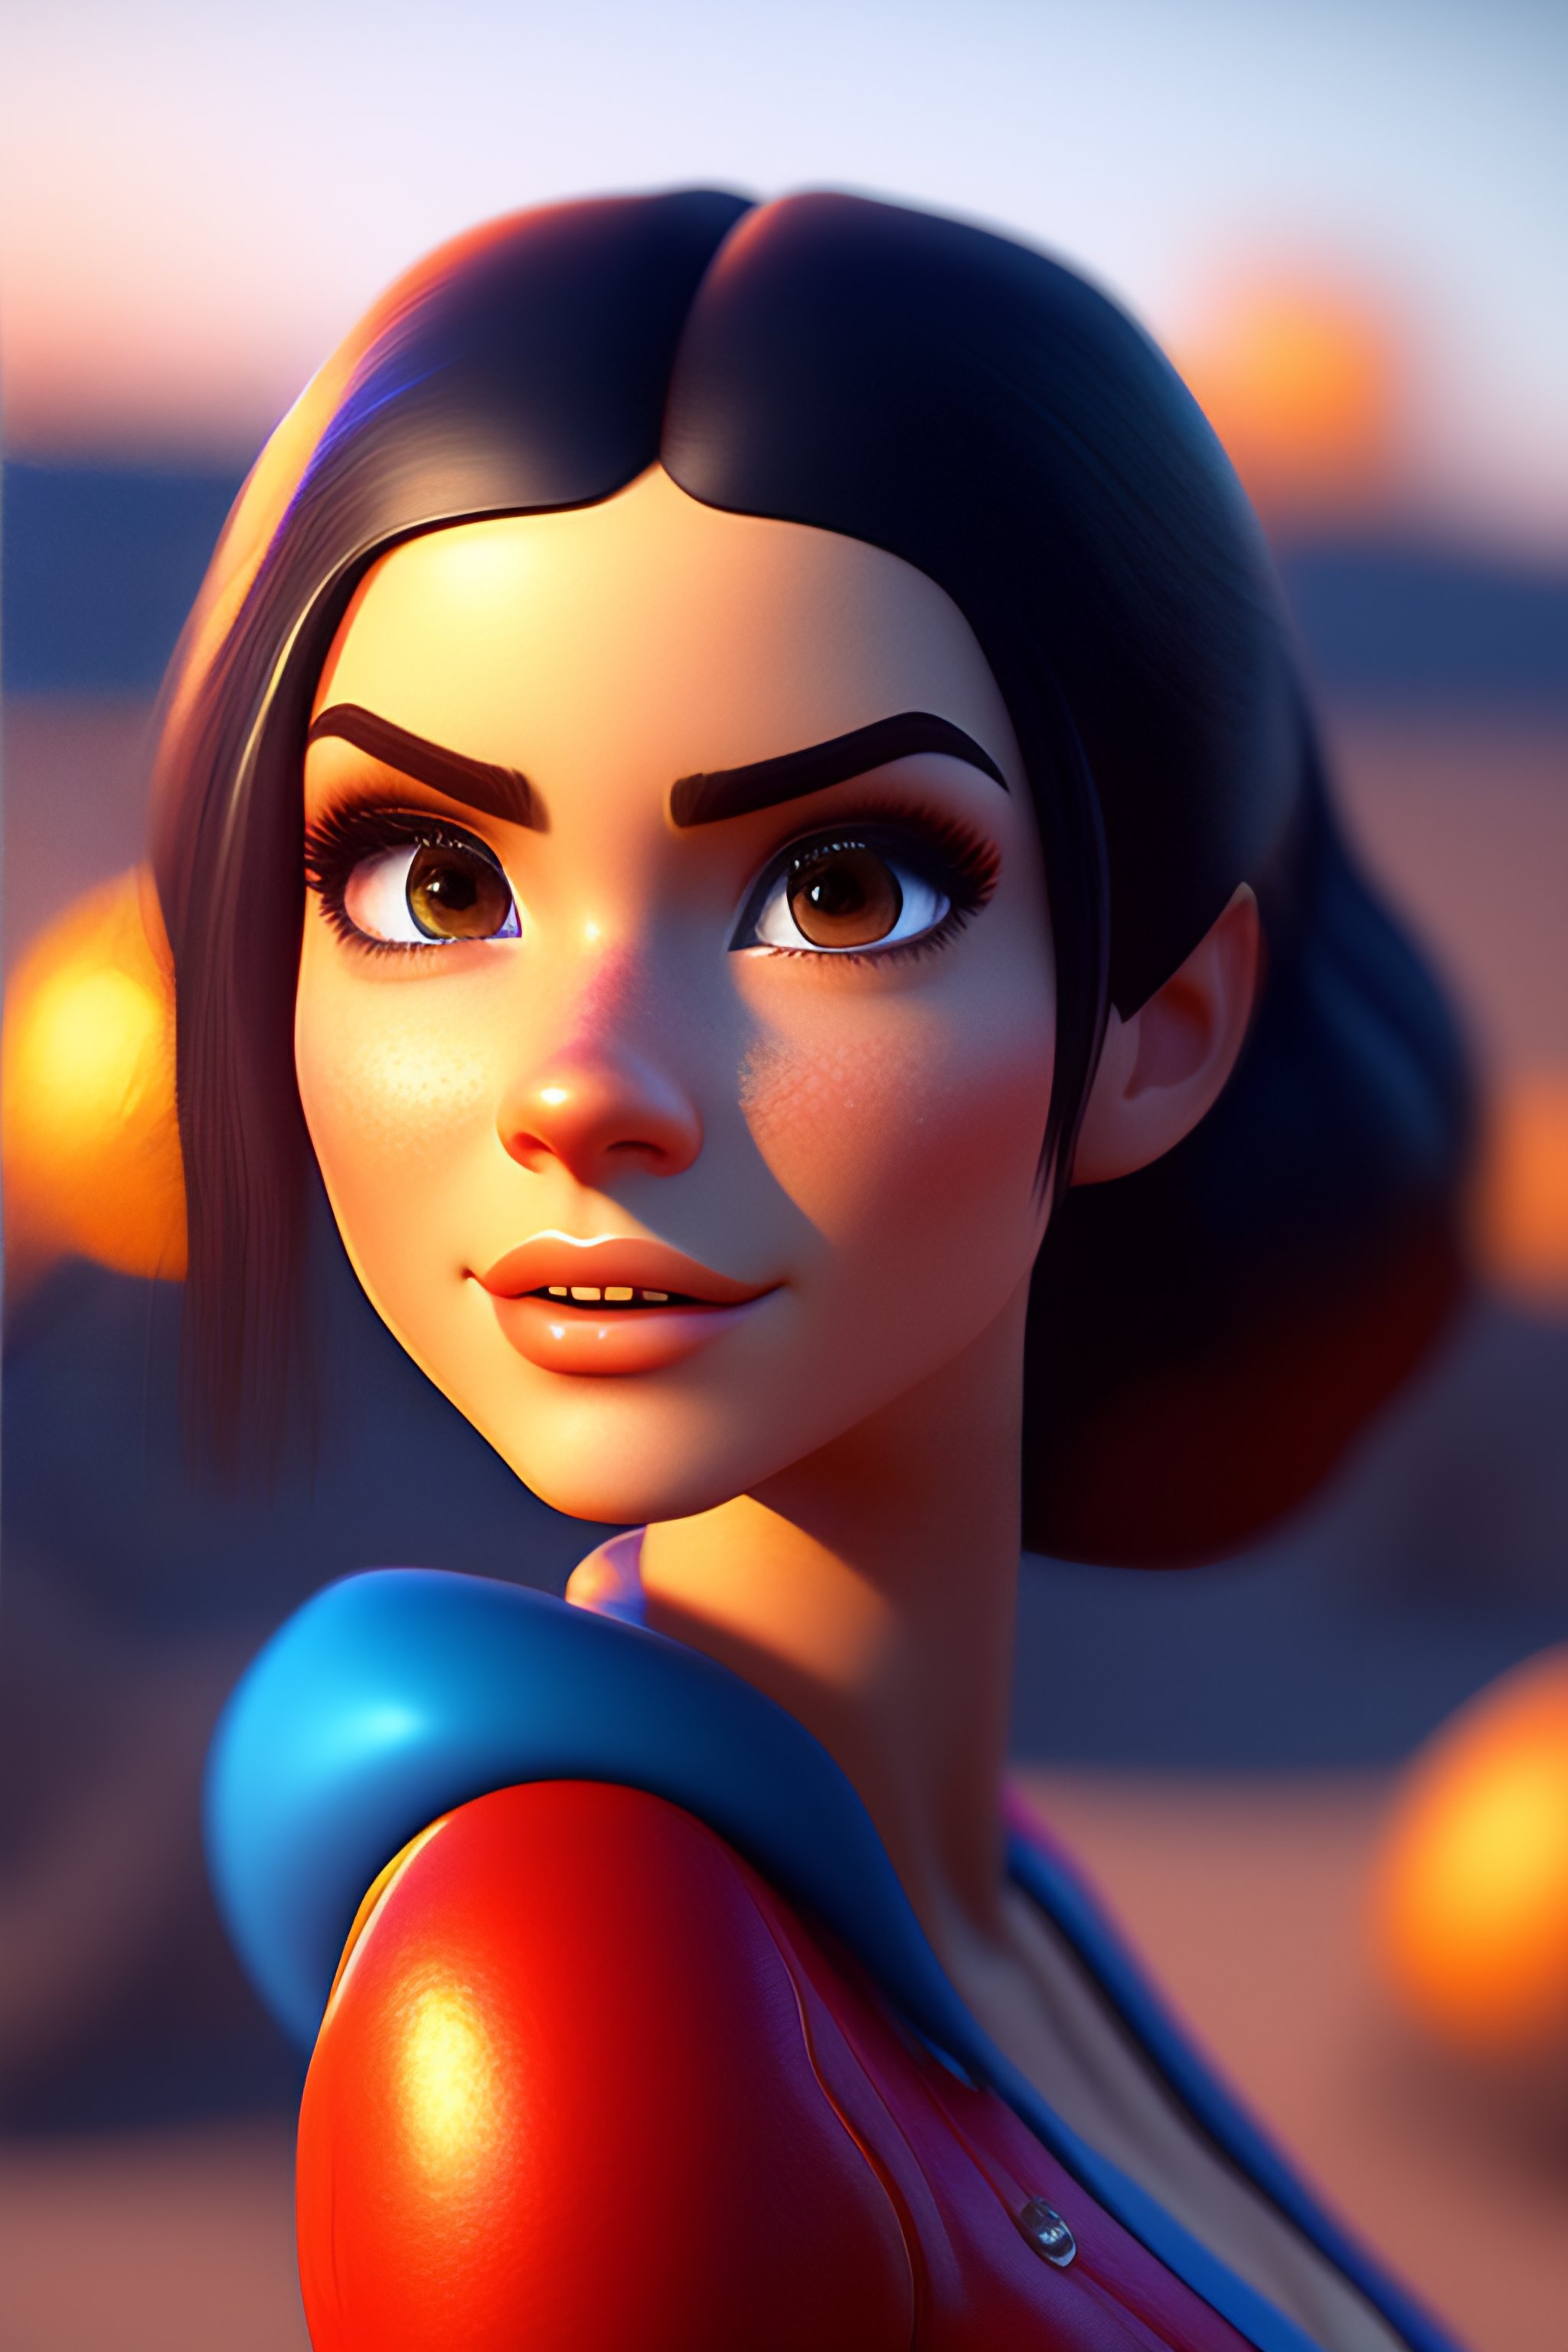 Lexica - Very hot girl, without bra, without pan, pixar style, 3d